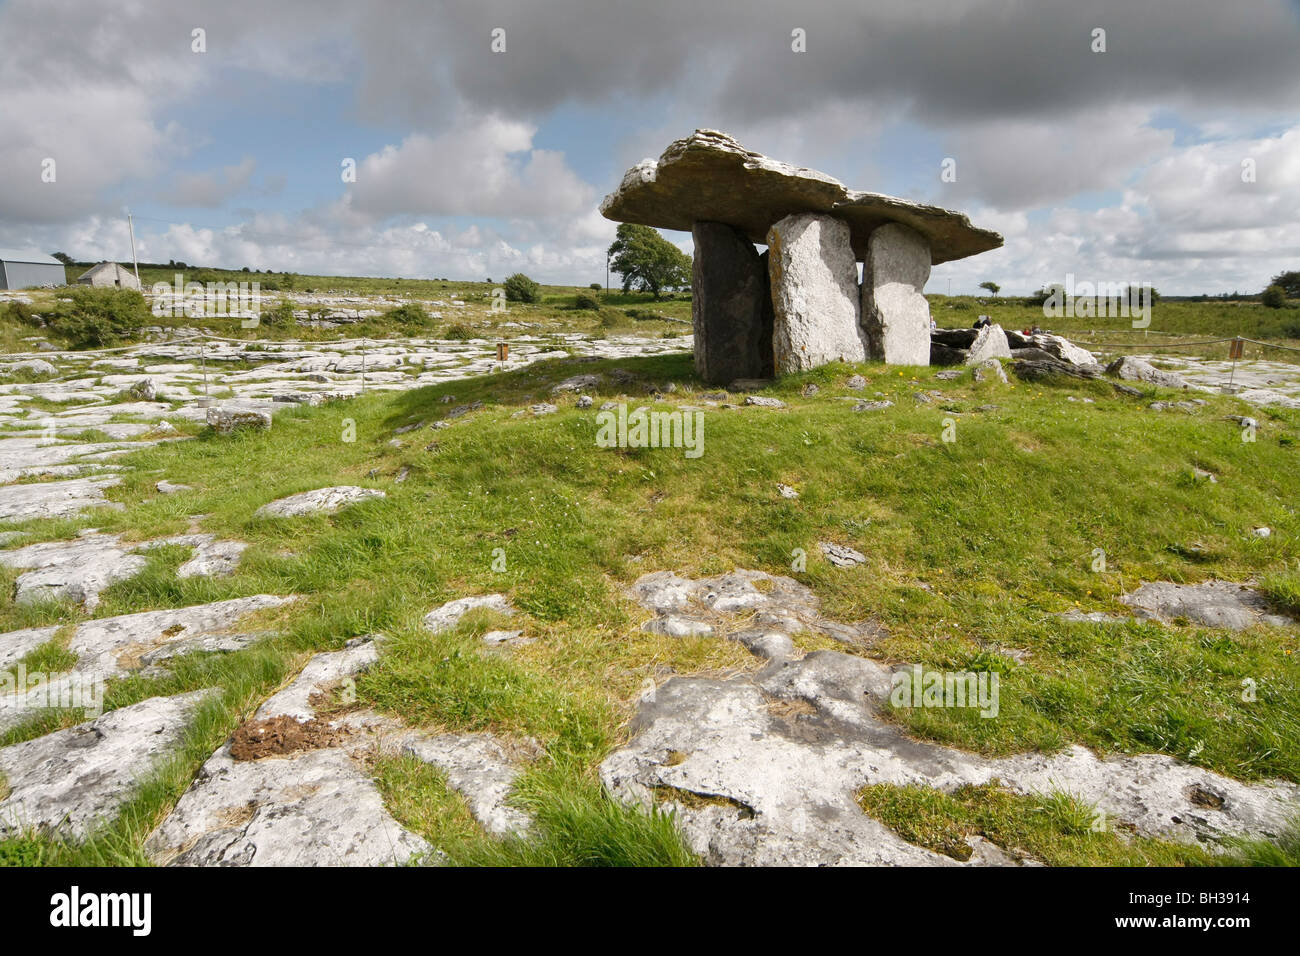 The Poulnabrone Portal Dolmen on the Burren, County Clare, Eire. Stock Photo